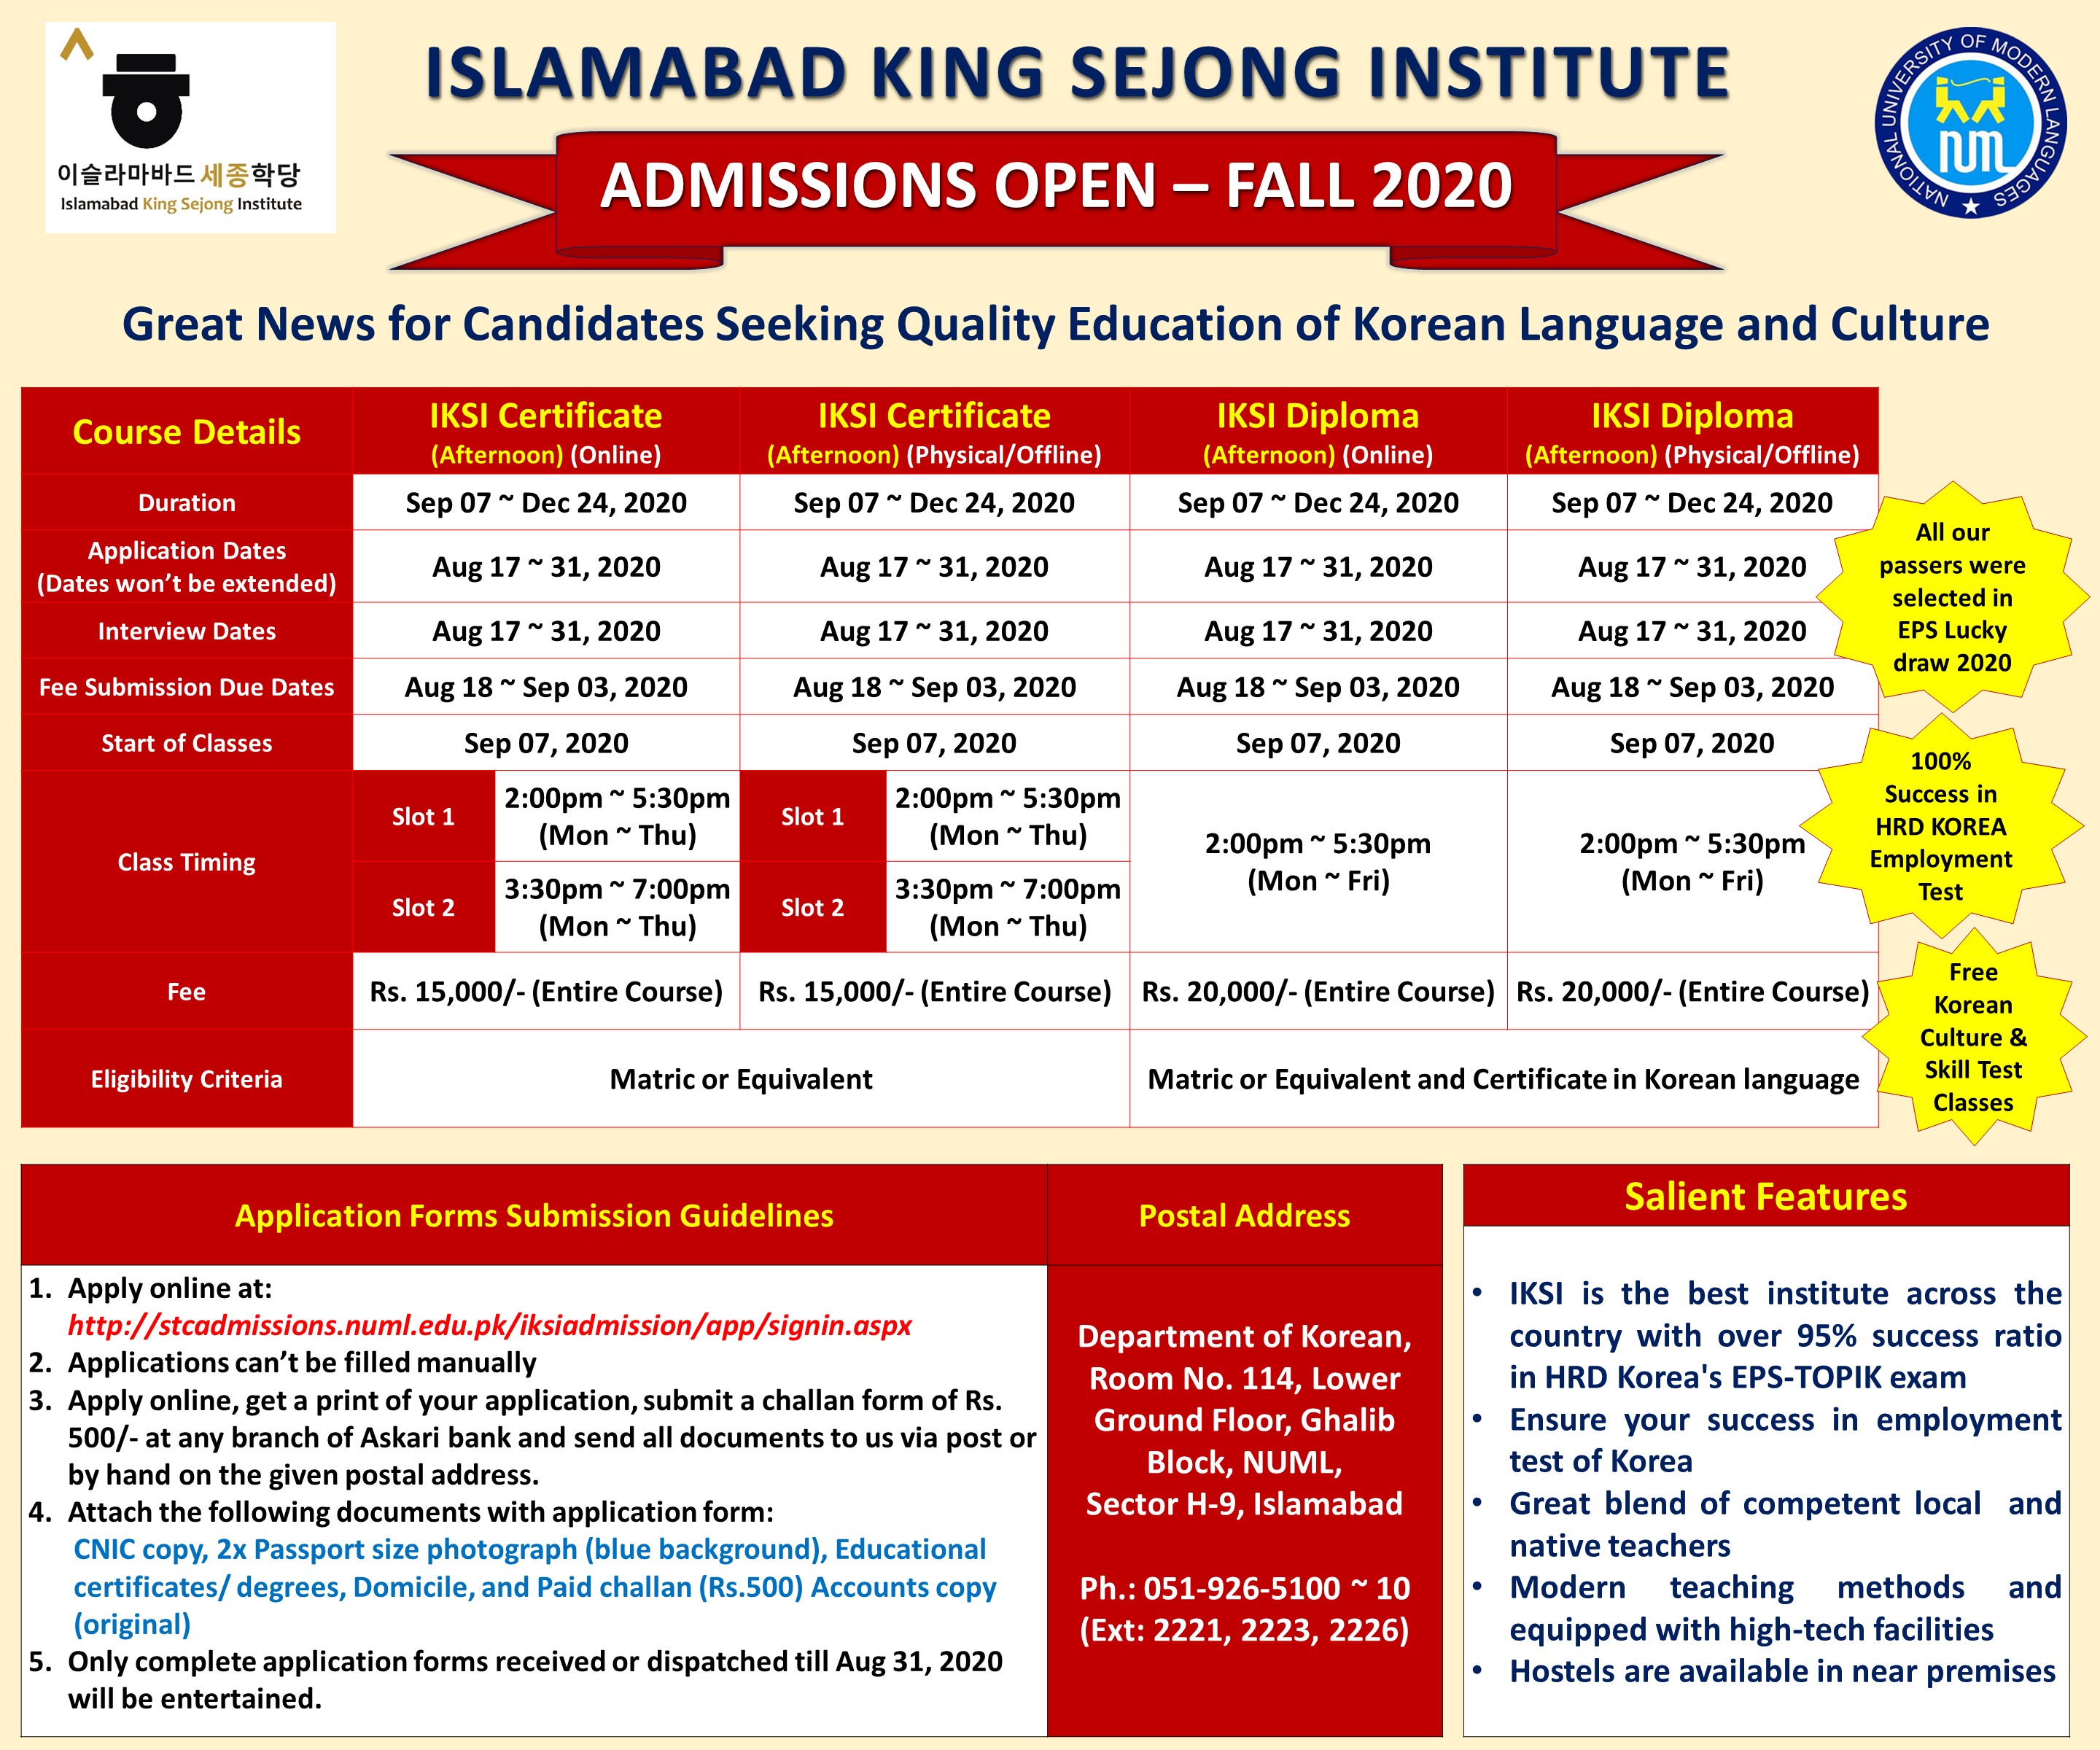 ISLAMABAD KING SEJONG INSTITUTE ADMISSIONS OPEN - FALL 2020